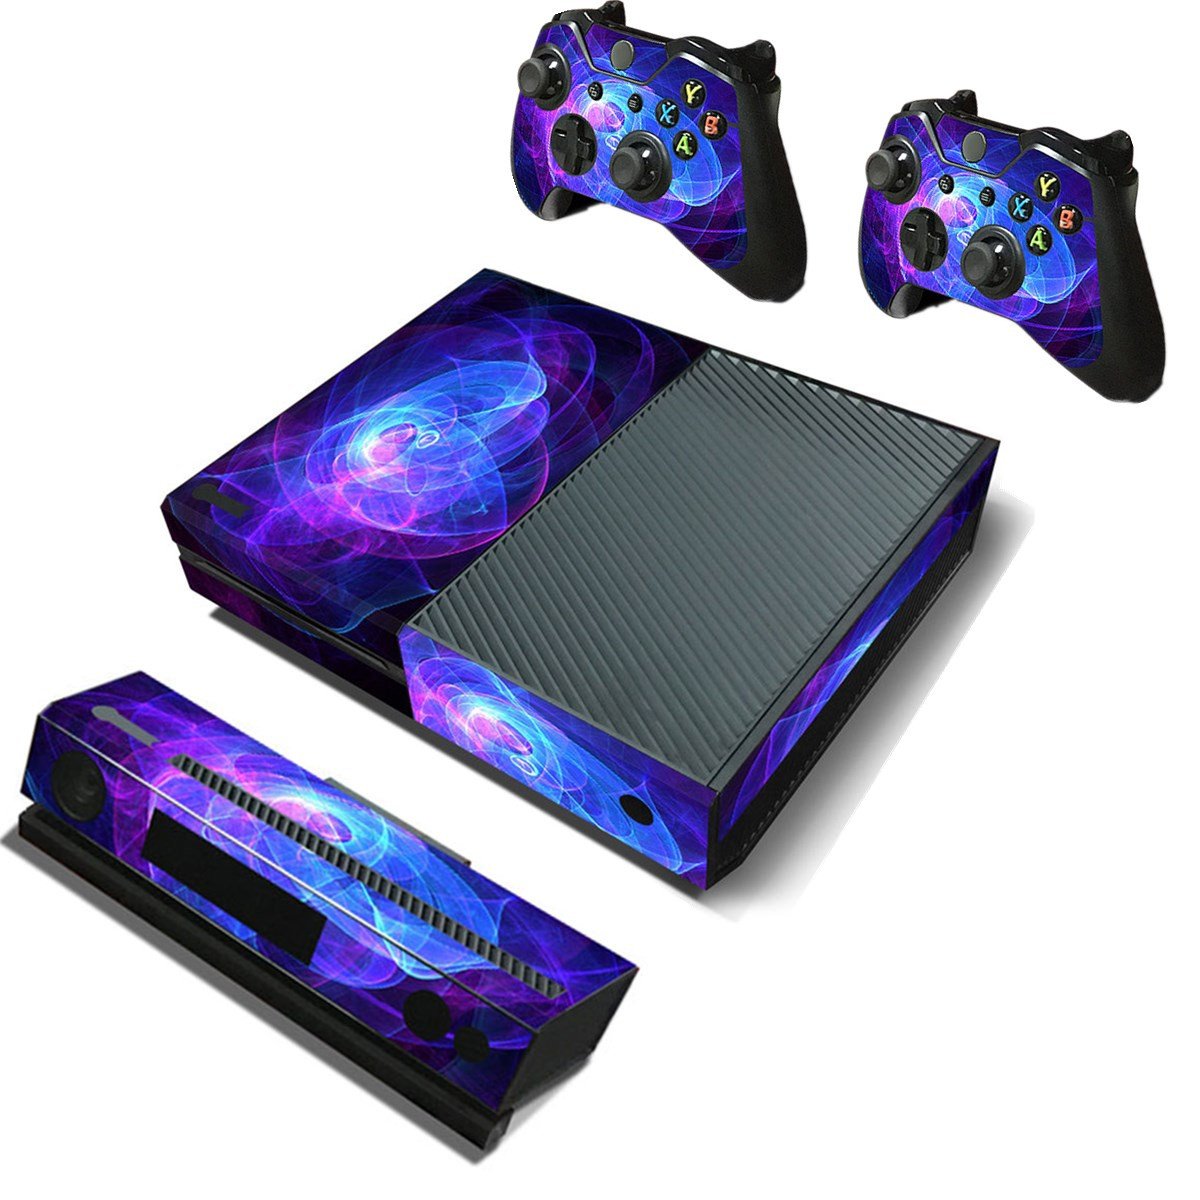 Purple Protective Vinyl Decal Skin Stickers Wrap Cover For Xbox One Game Console Game Controller Kinect 1